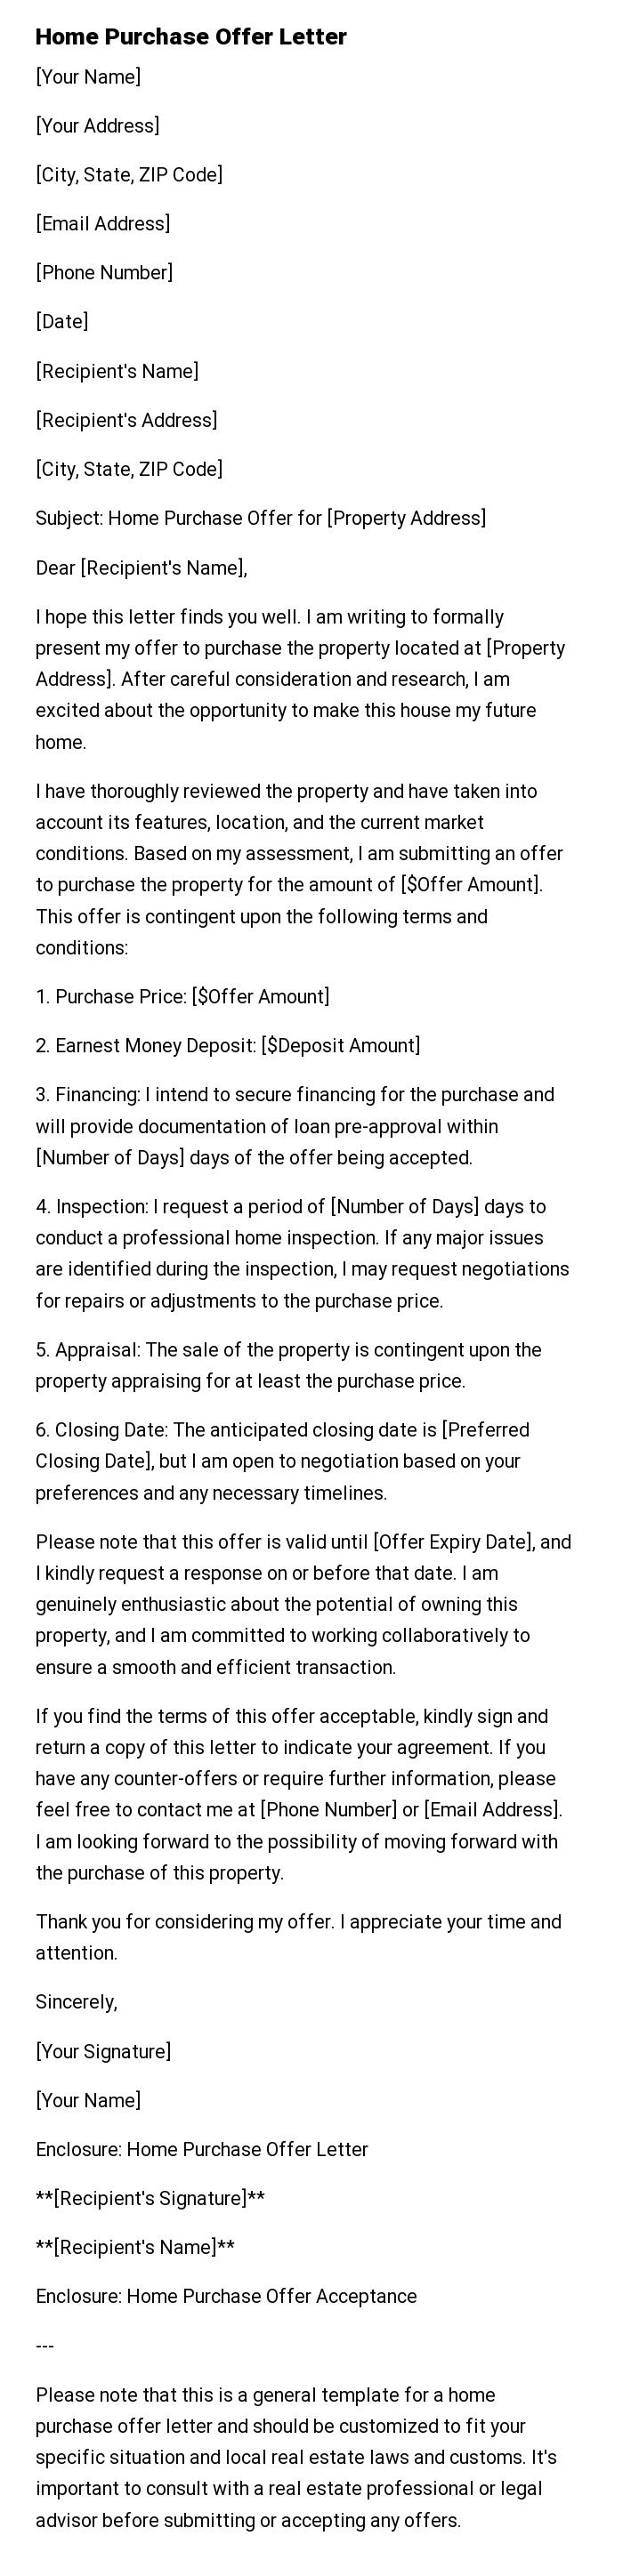 Home Purchase Offer Letter